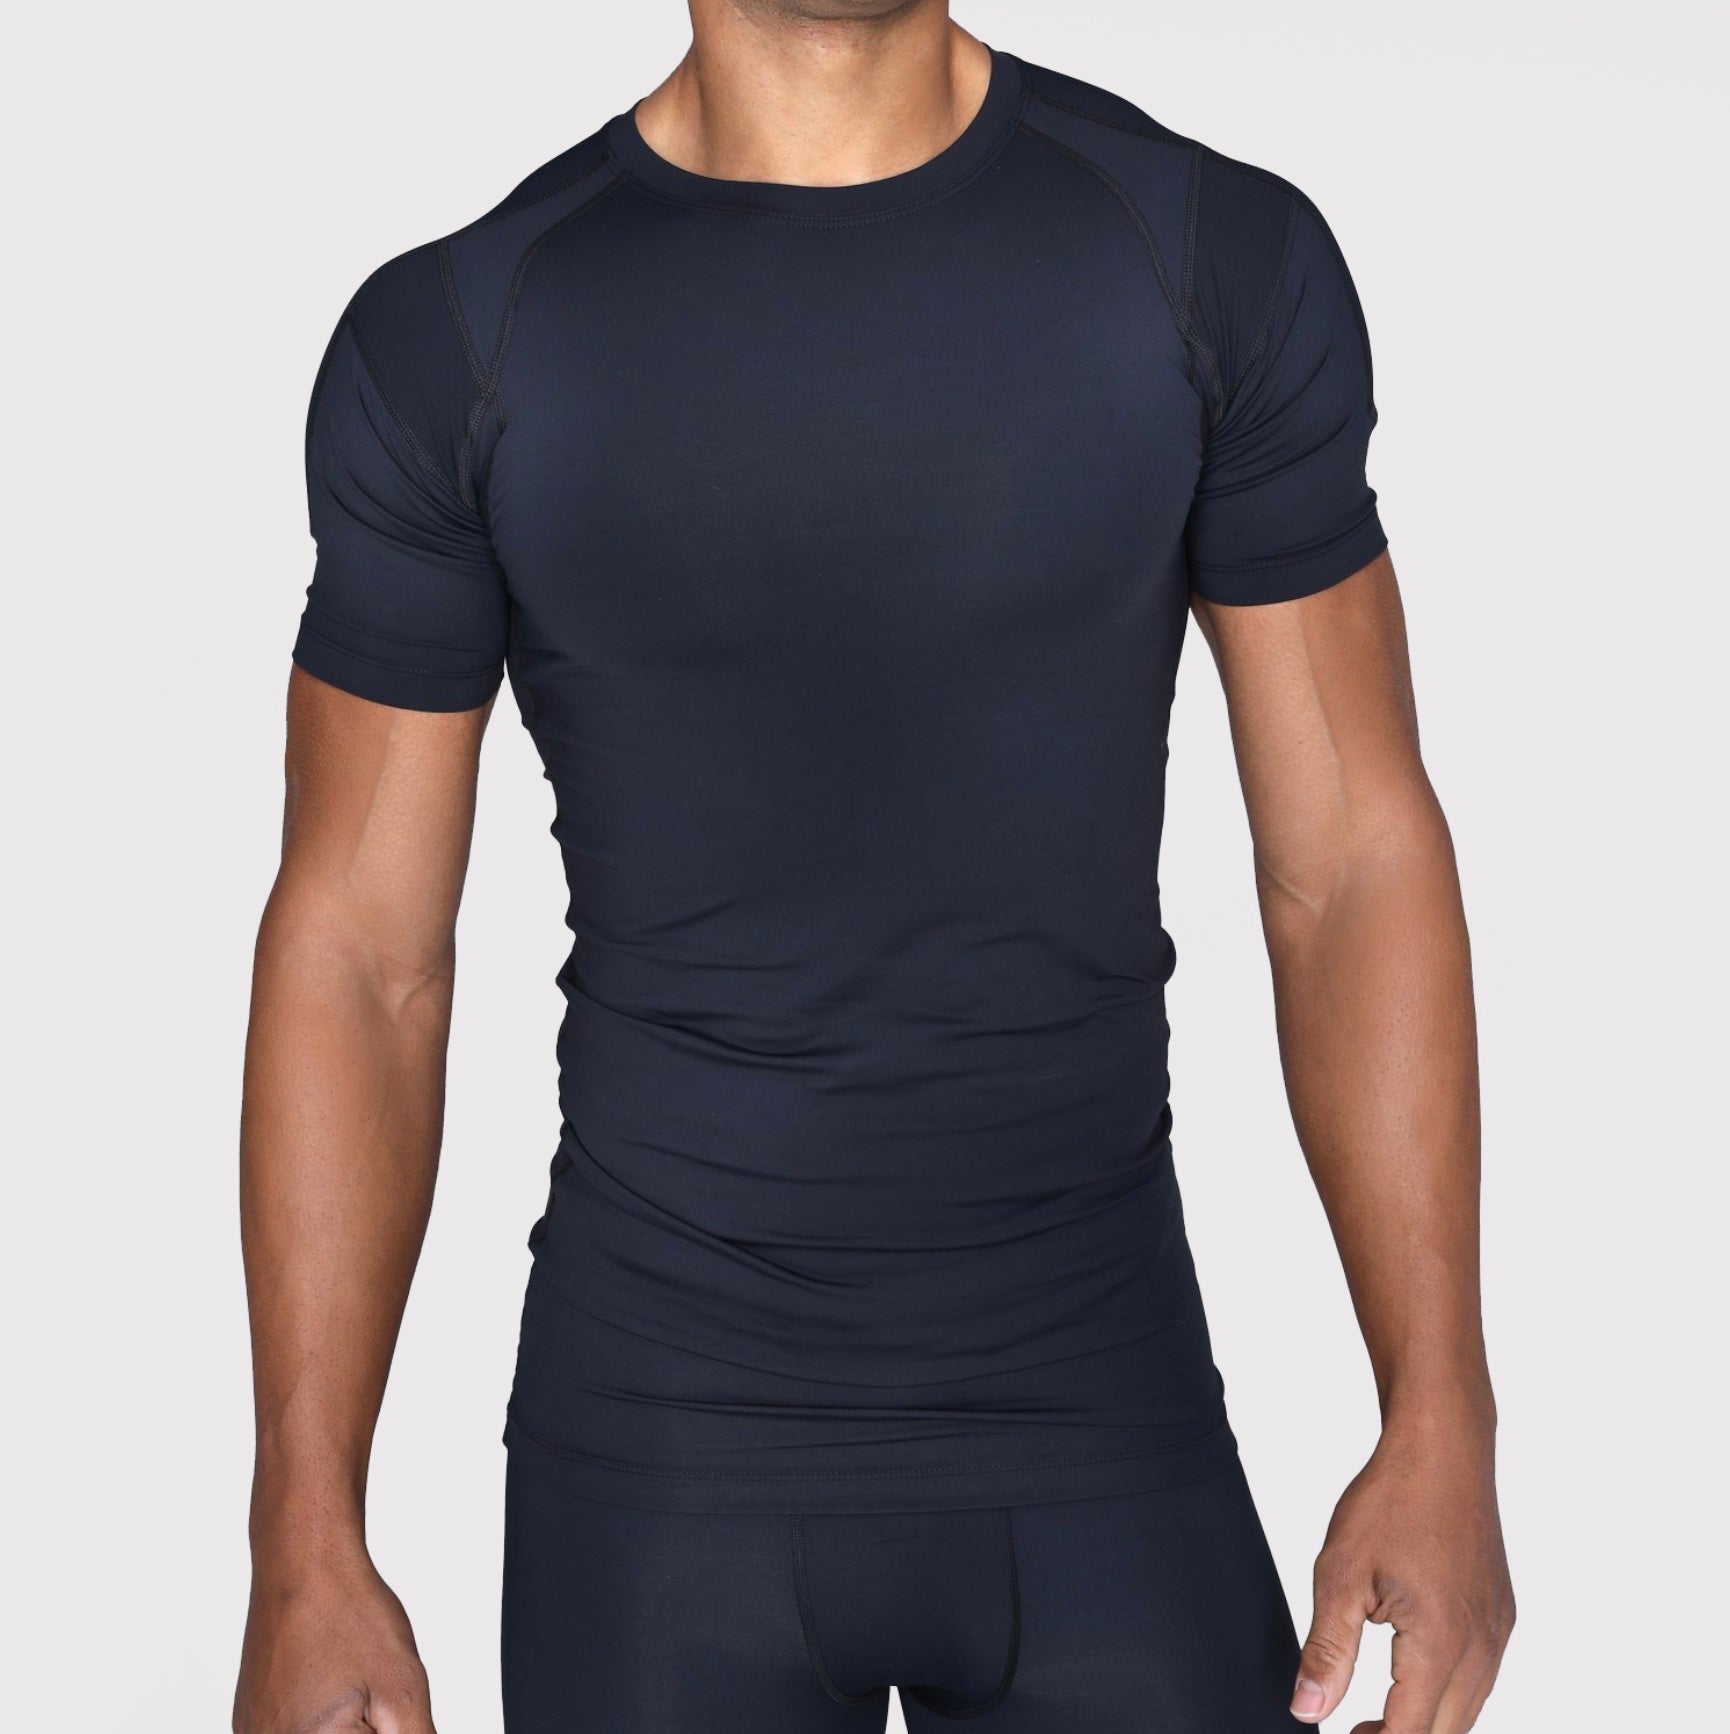  Tight Compression Shirts for Mens, Breathable Body